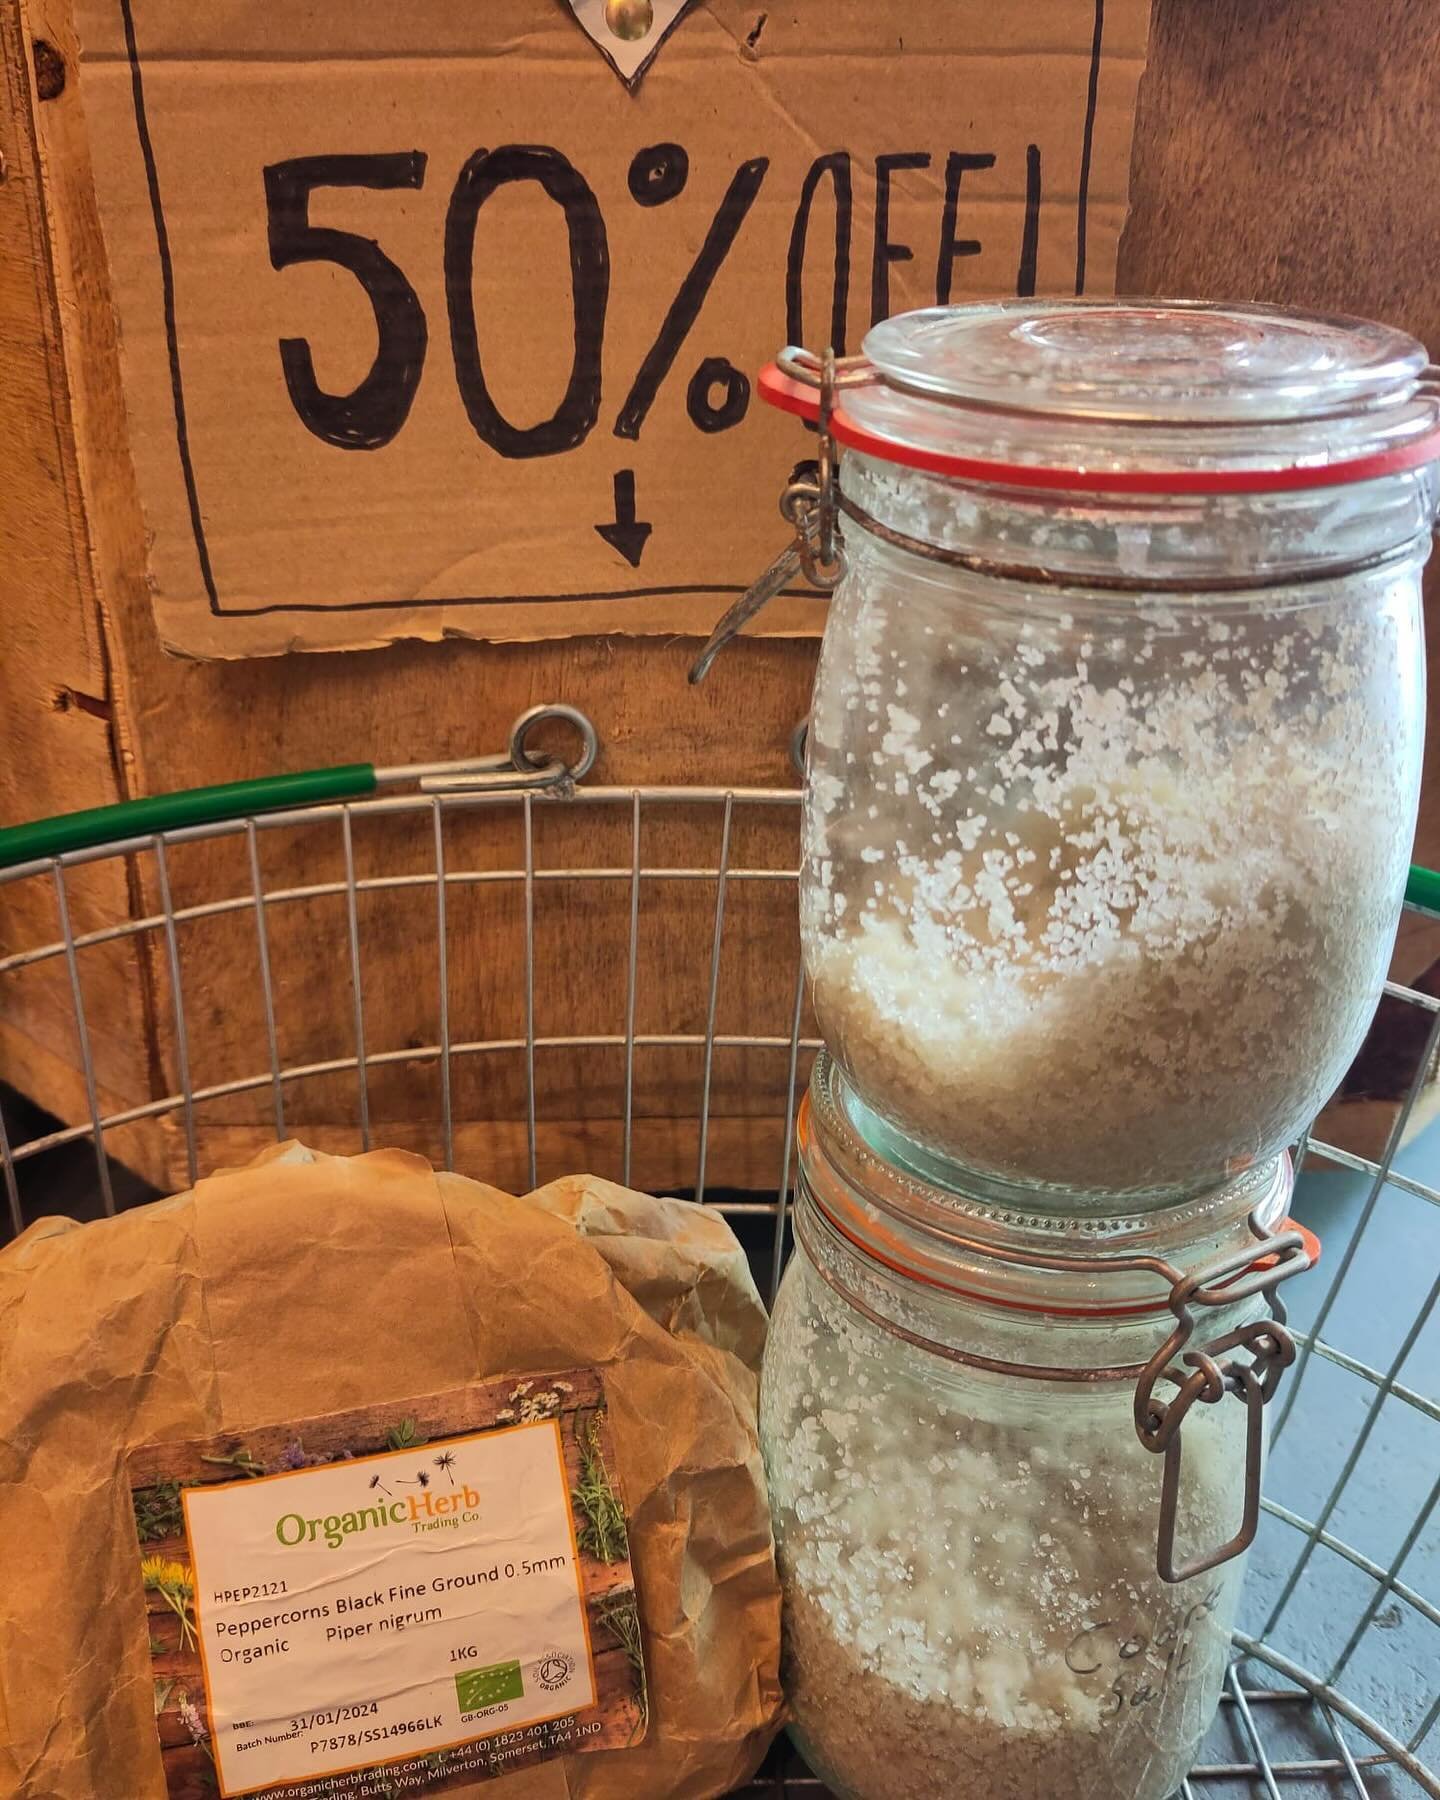 Discount alert! We have course salt and ground black pepper with 50% off as we are discountinuting both products. Come and grab a bargain while they last! Open today 14:30-19:30.

#eastlondon #hackney #hackneycityfarm #organic #healthyfood #plantbase